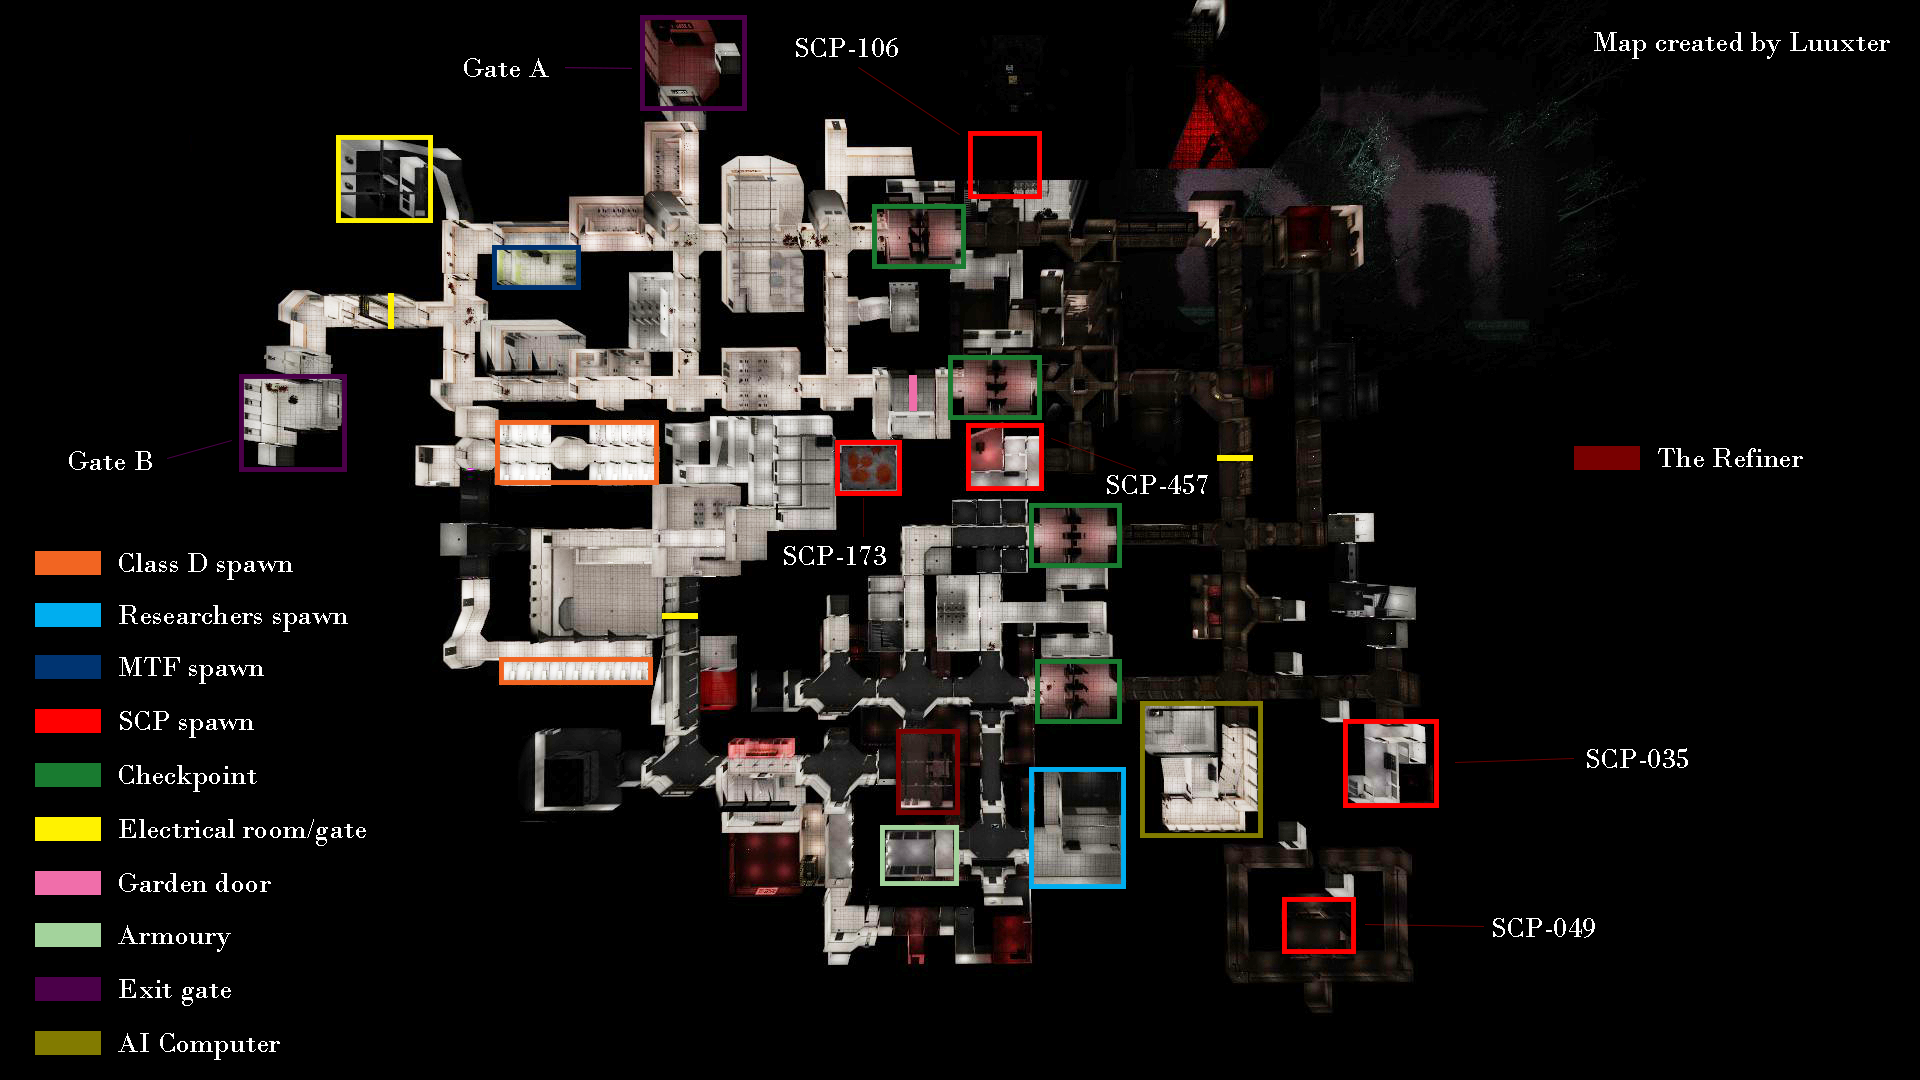 Scp containment breach map layout